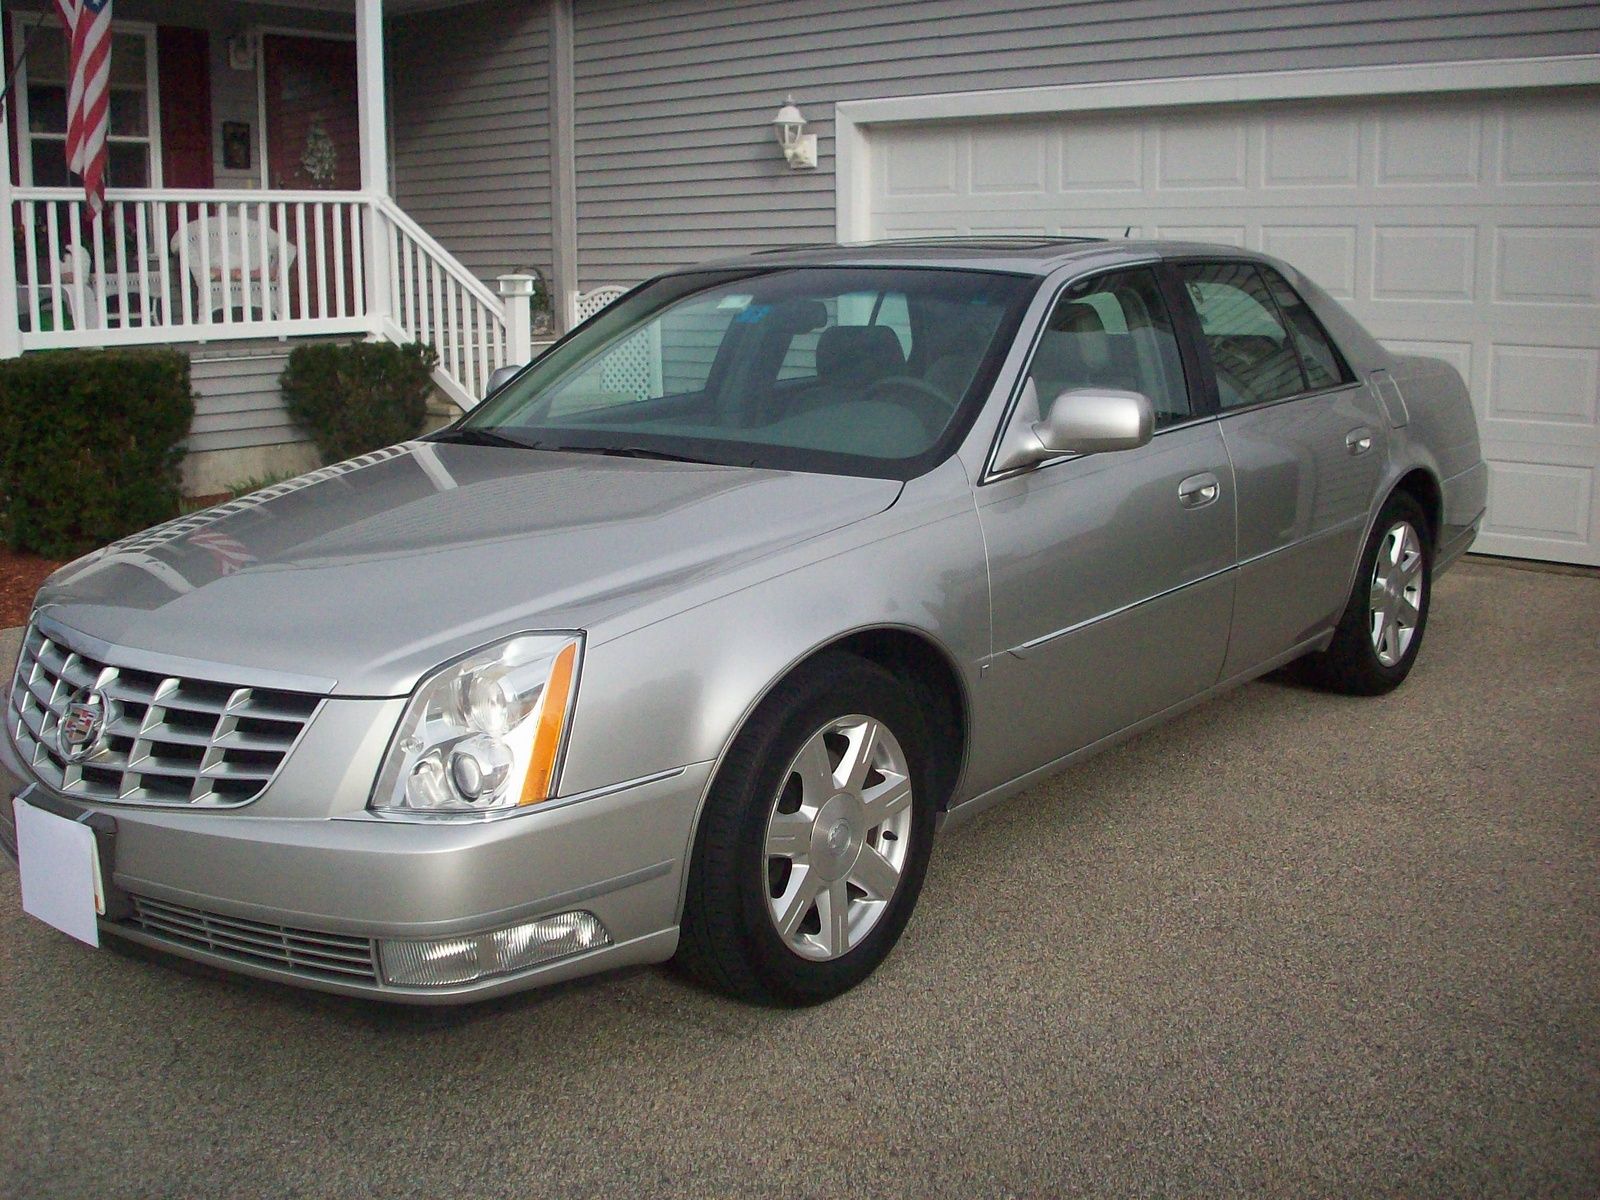 2010 Cadillac DTS 1SD Specs, Colors, 0-60, 0-100, Quarter Mile Drag and ...